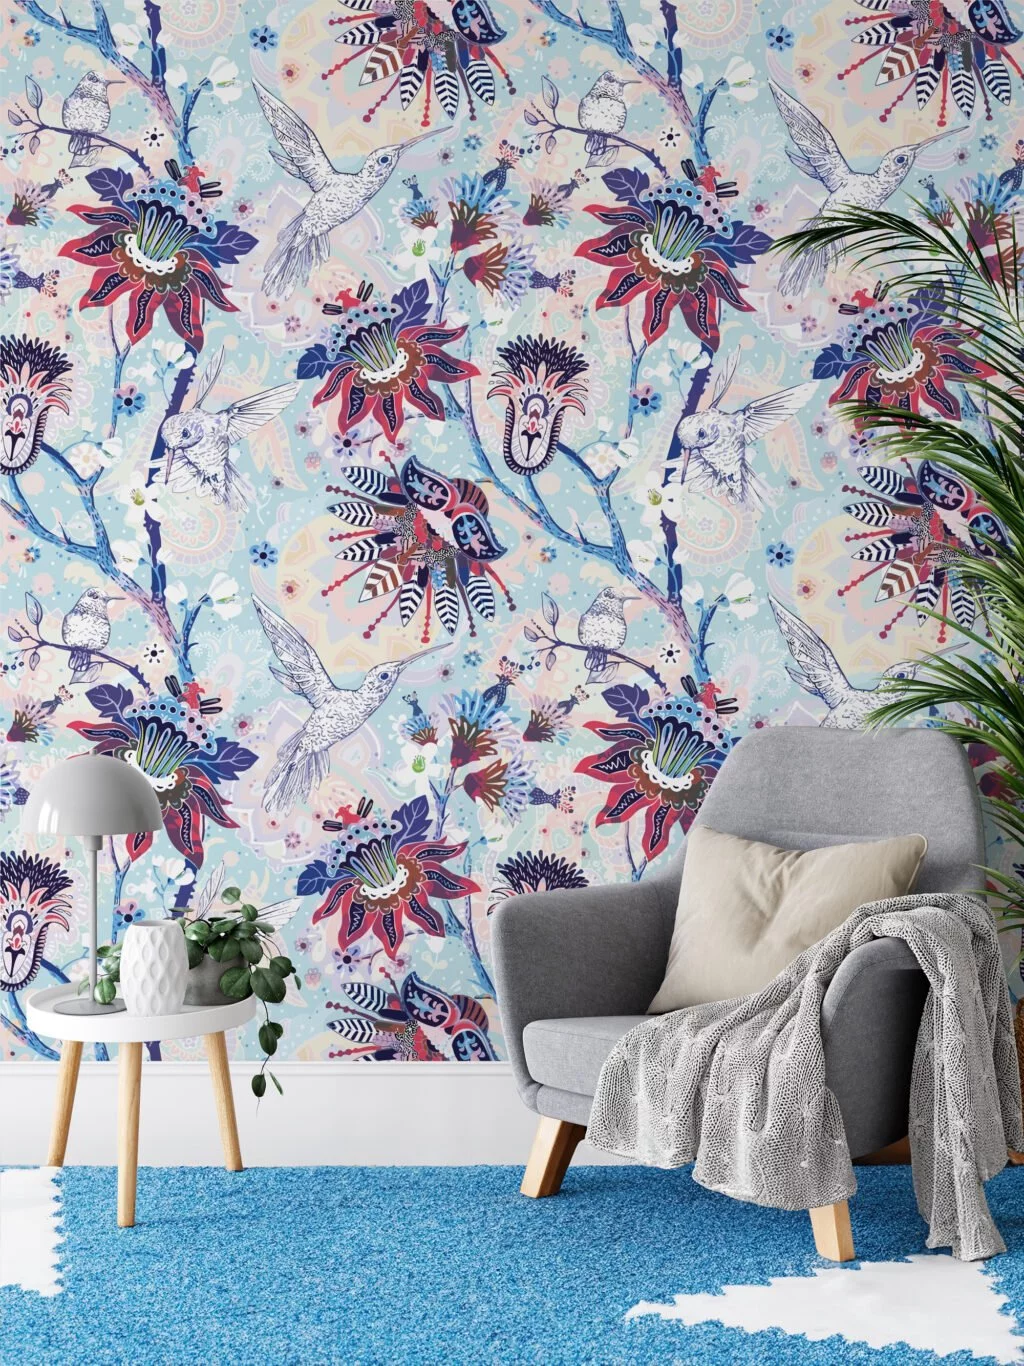 Floral Paisley Pattern With Hummingbirds Illustration Wallpaper, Whimsical Birds and Florals Peel & Stick Wall Mural